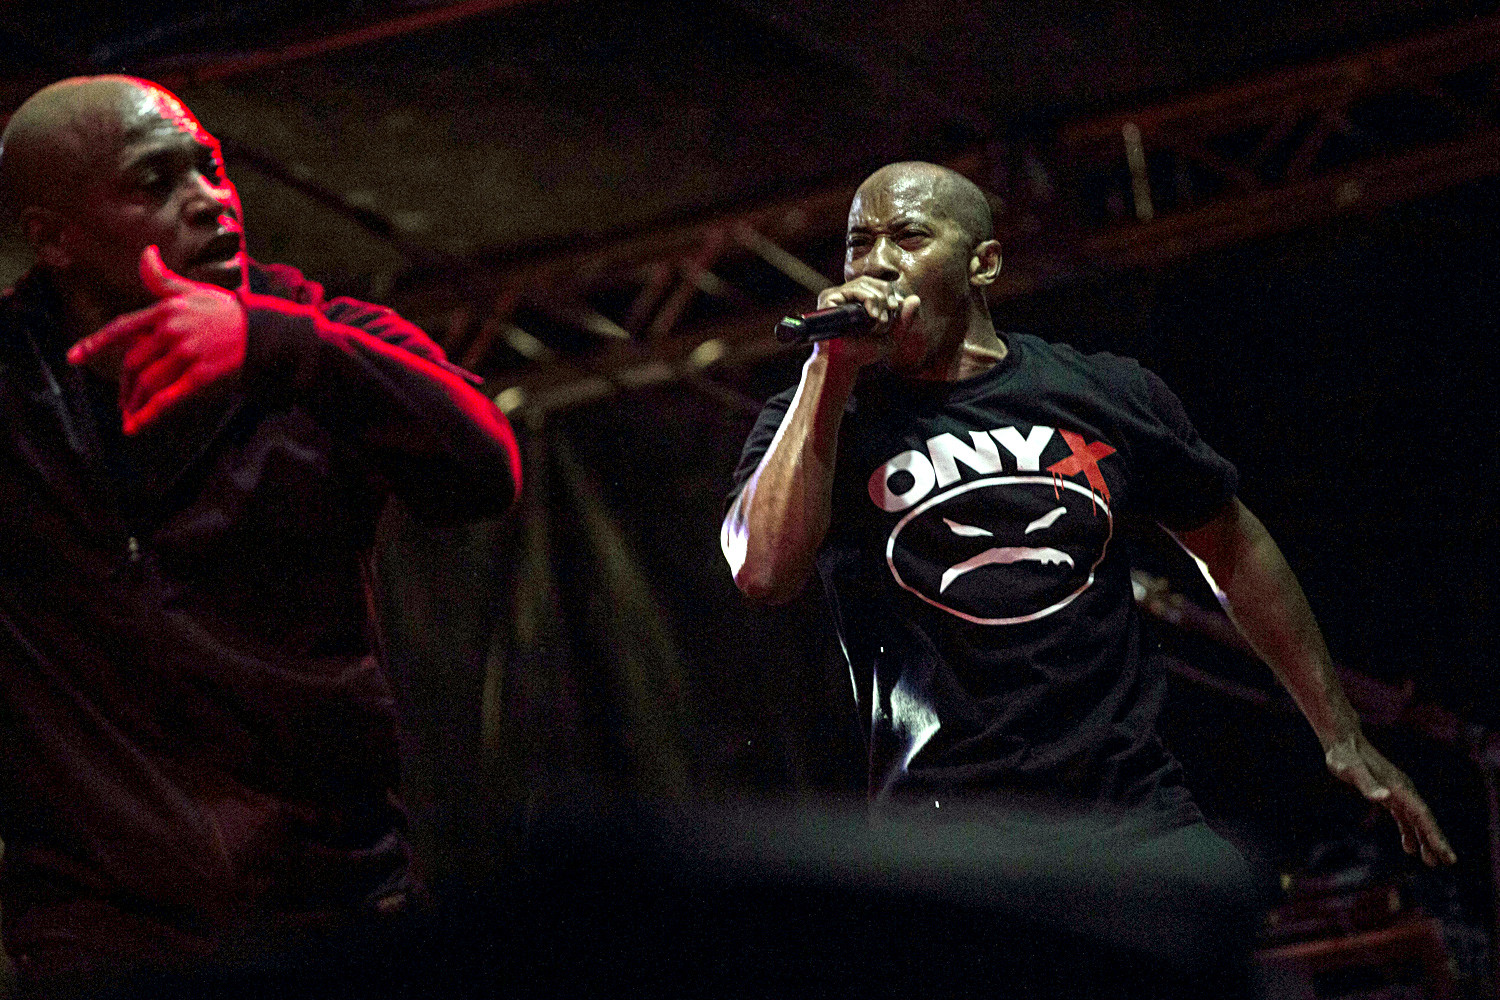 Onyx hip-hop band during Warsaw Challenge festival in Warsaw on May 15, 2017.